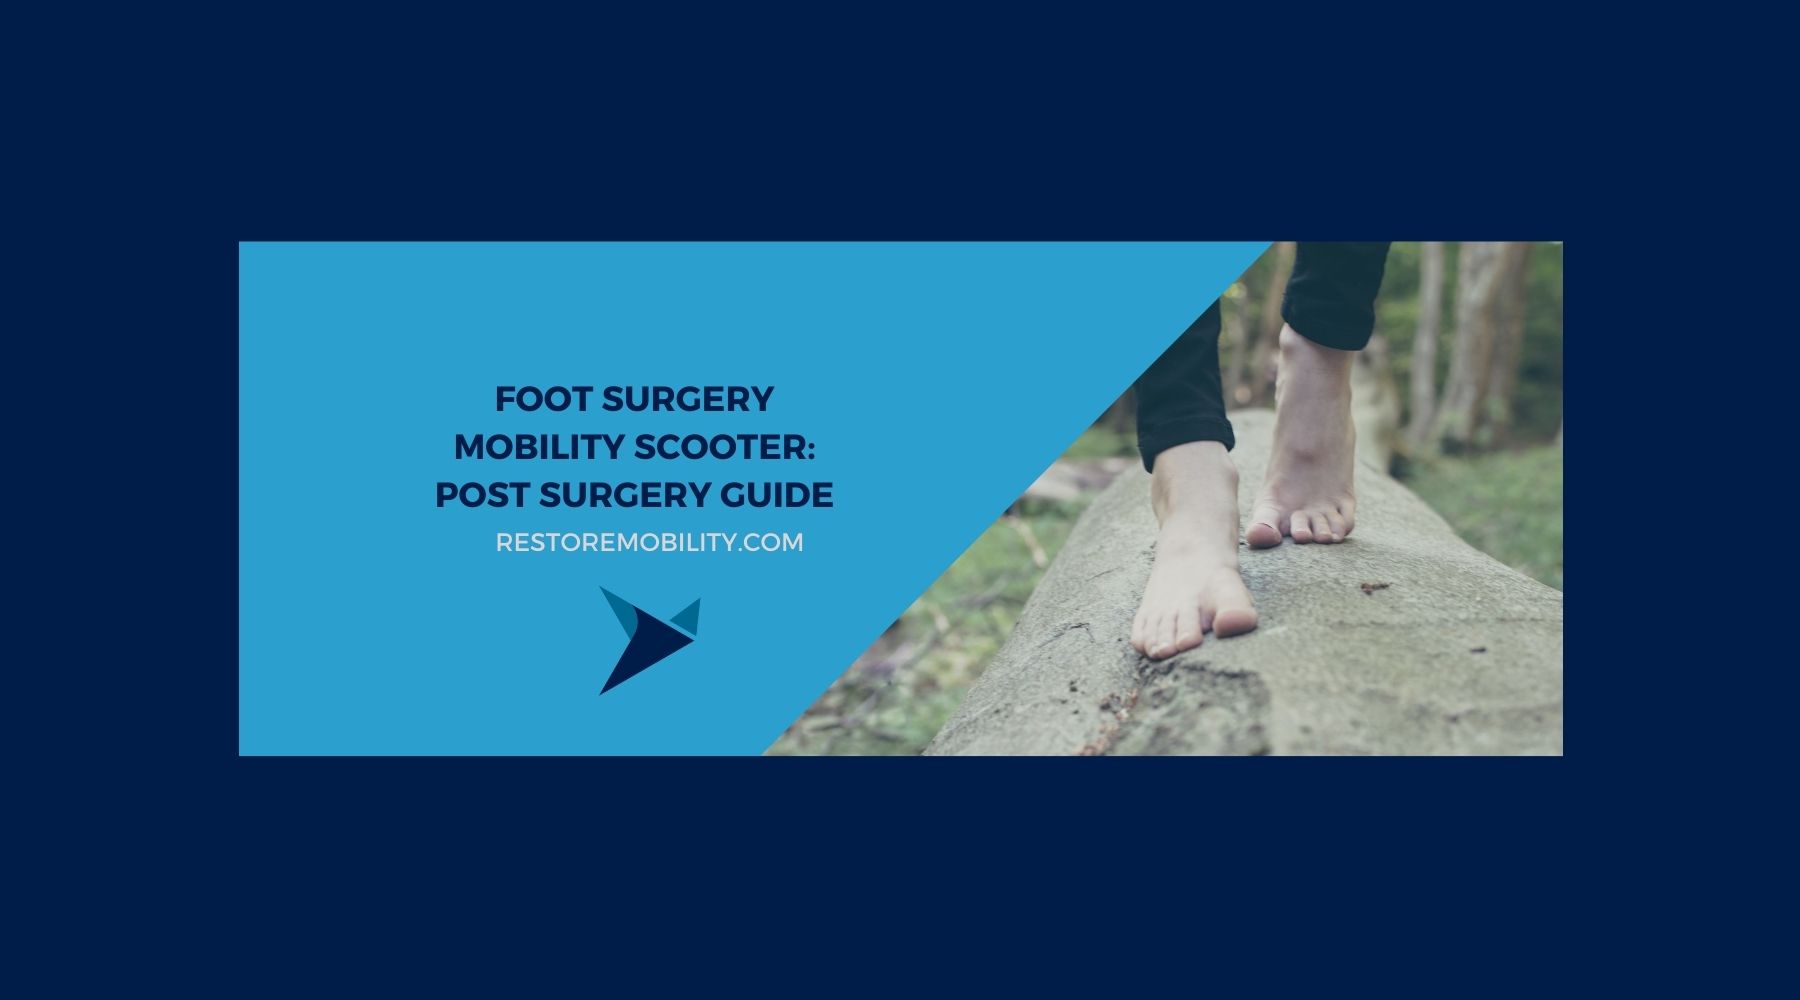 Foot Surgery Mobility Scooter: Post Surgery Guide